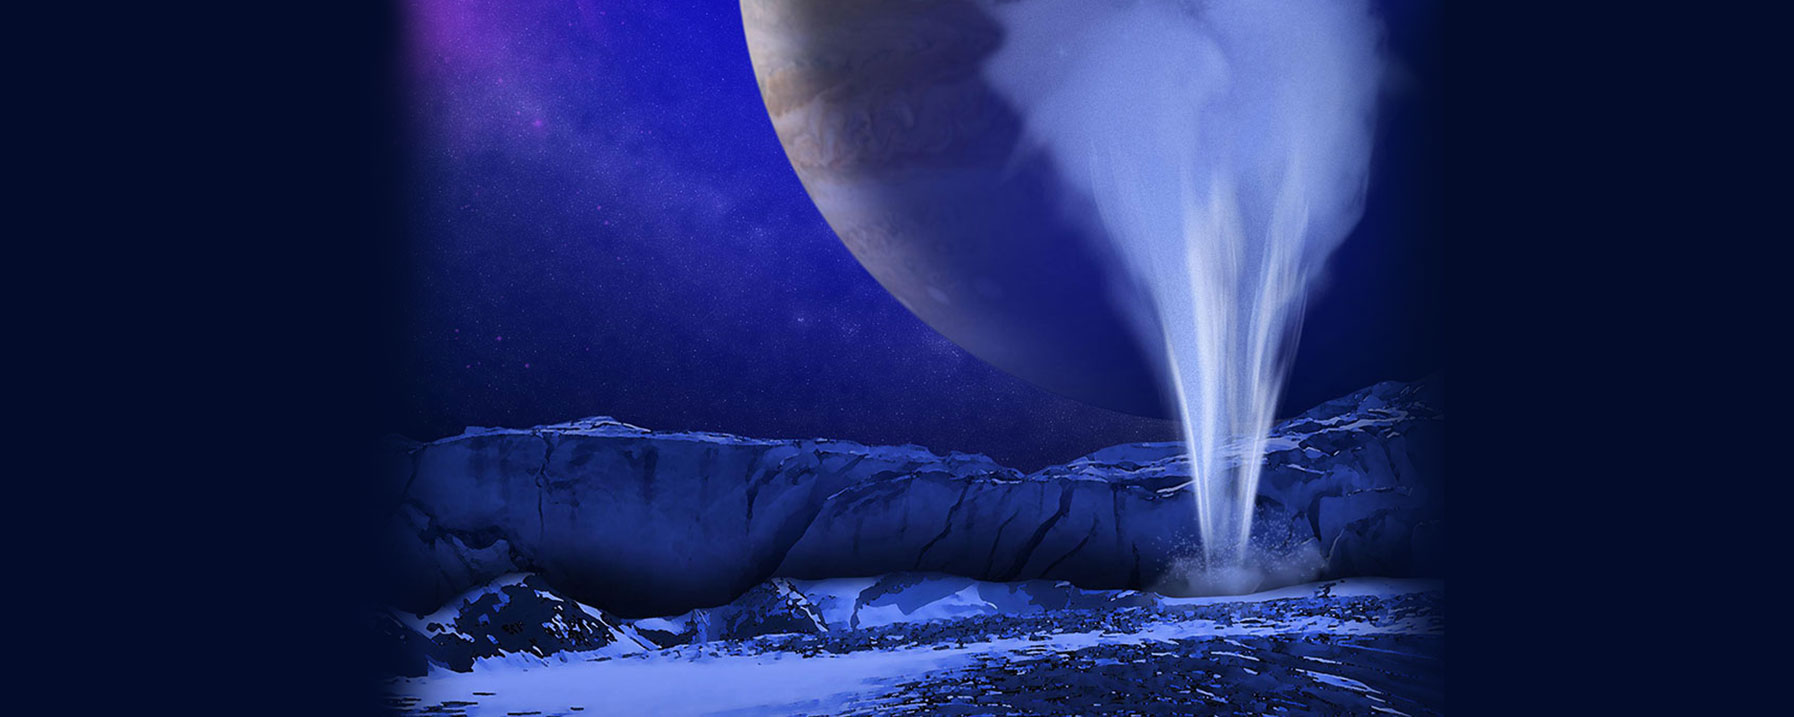 This illustration depicts a plume of water vapor that could potentially be emitted from the icy surface of Jupiter’s moon Europa. New research sheds light on what plumes, if they do exist, could reveal about lakes that may be inside the moon’s crust.